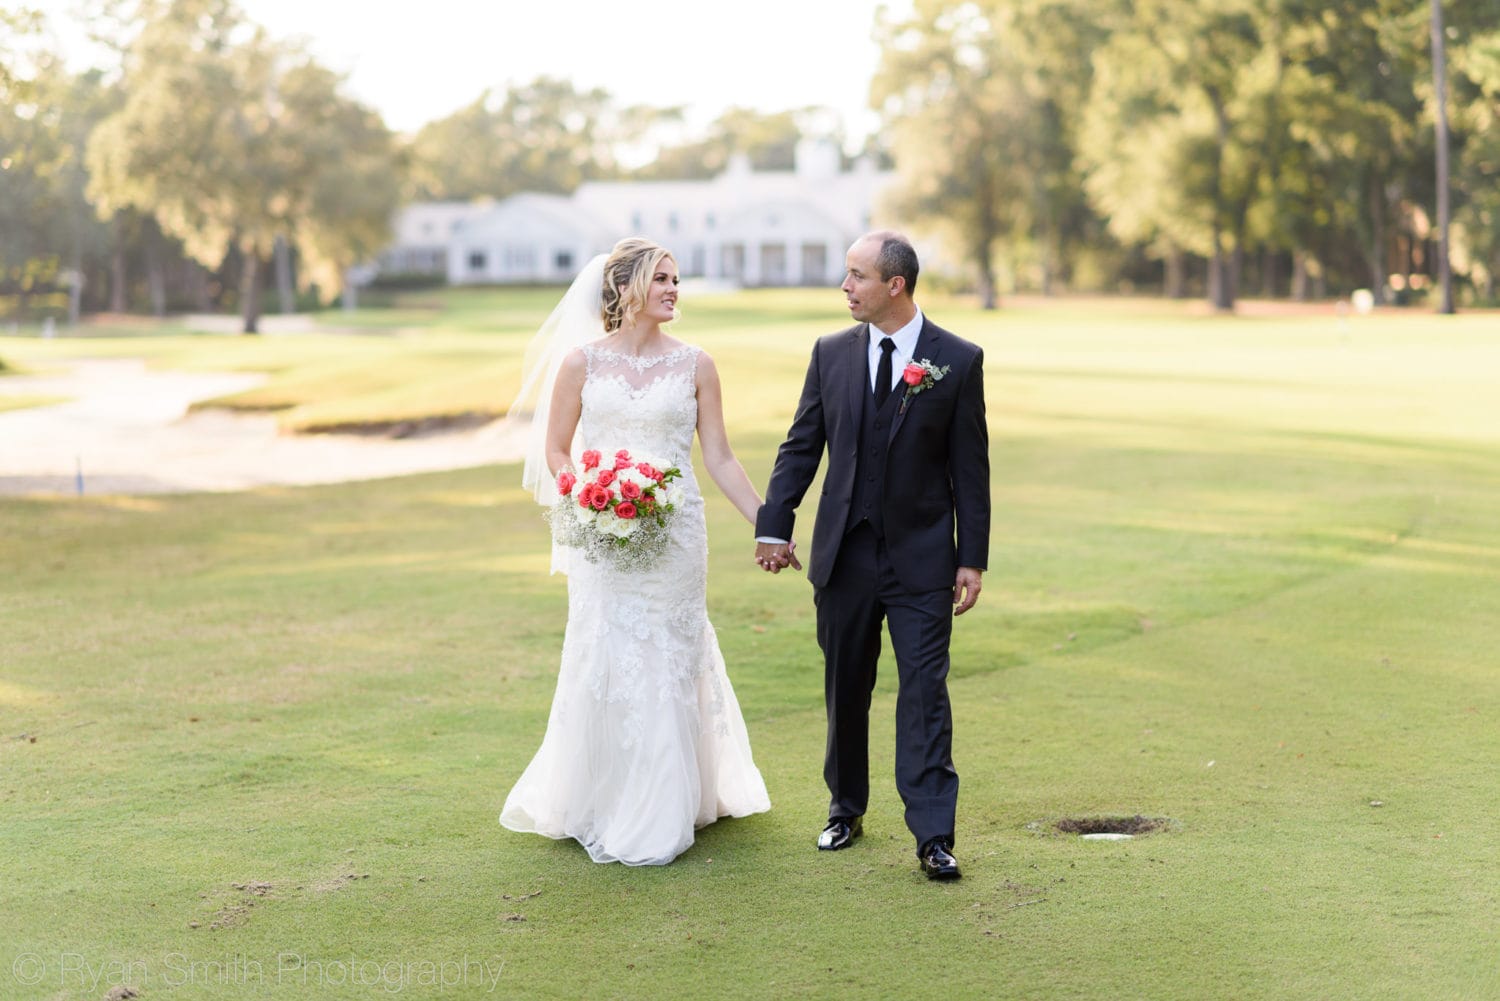 Walking down the golf course together - Pawleys Plantation